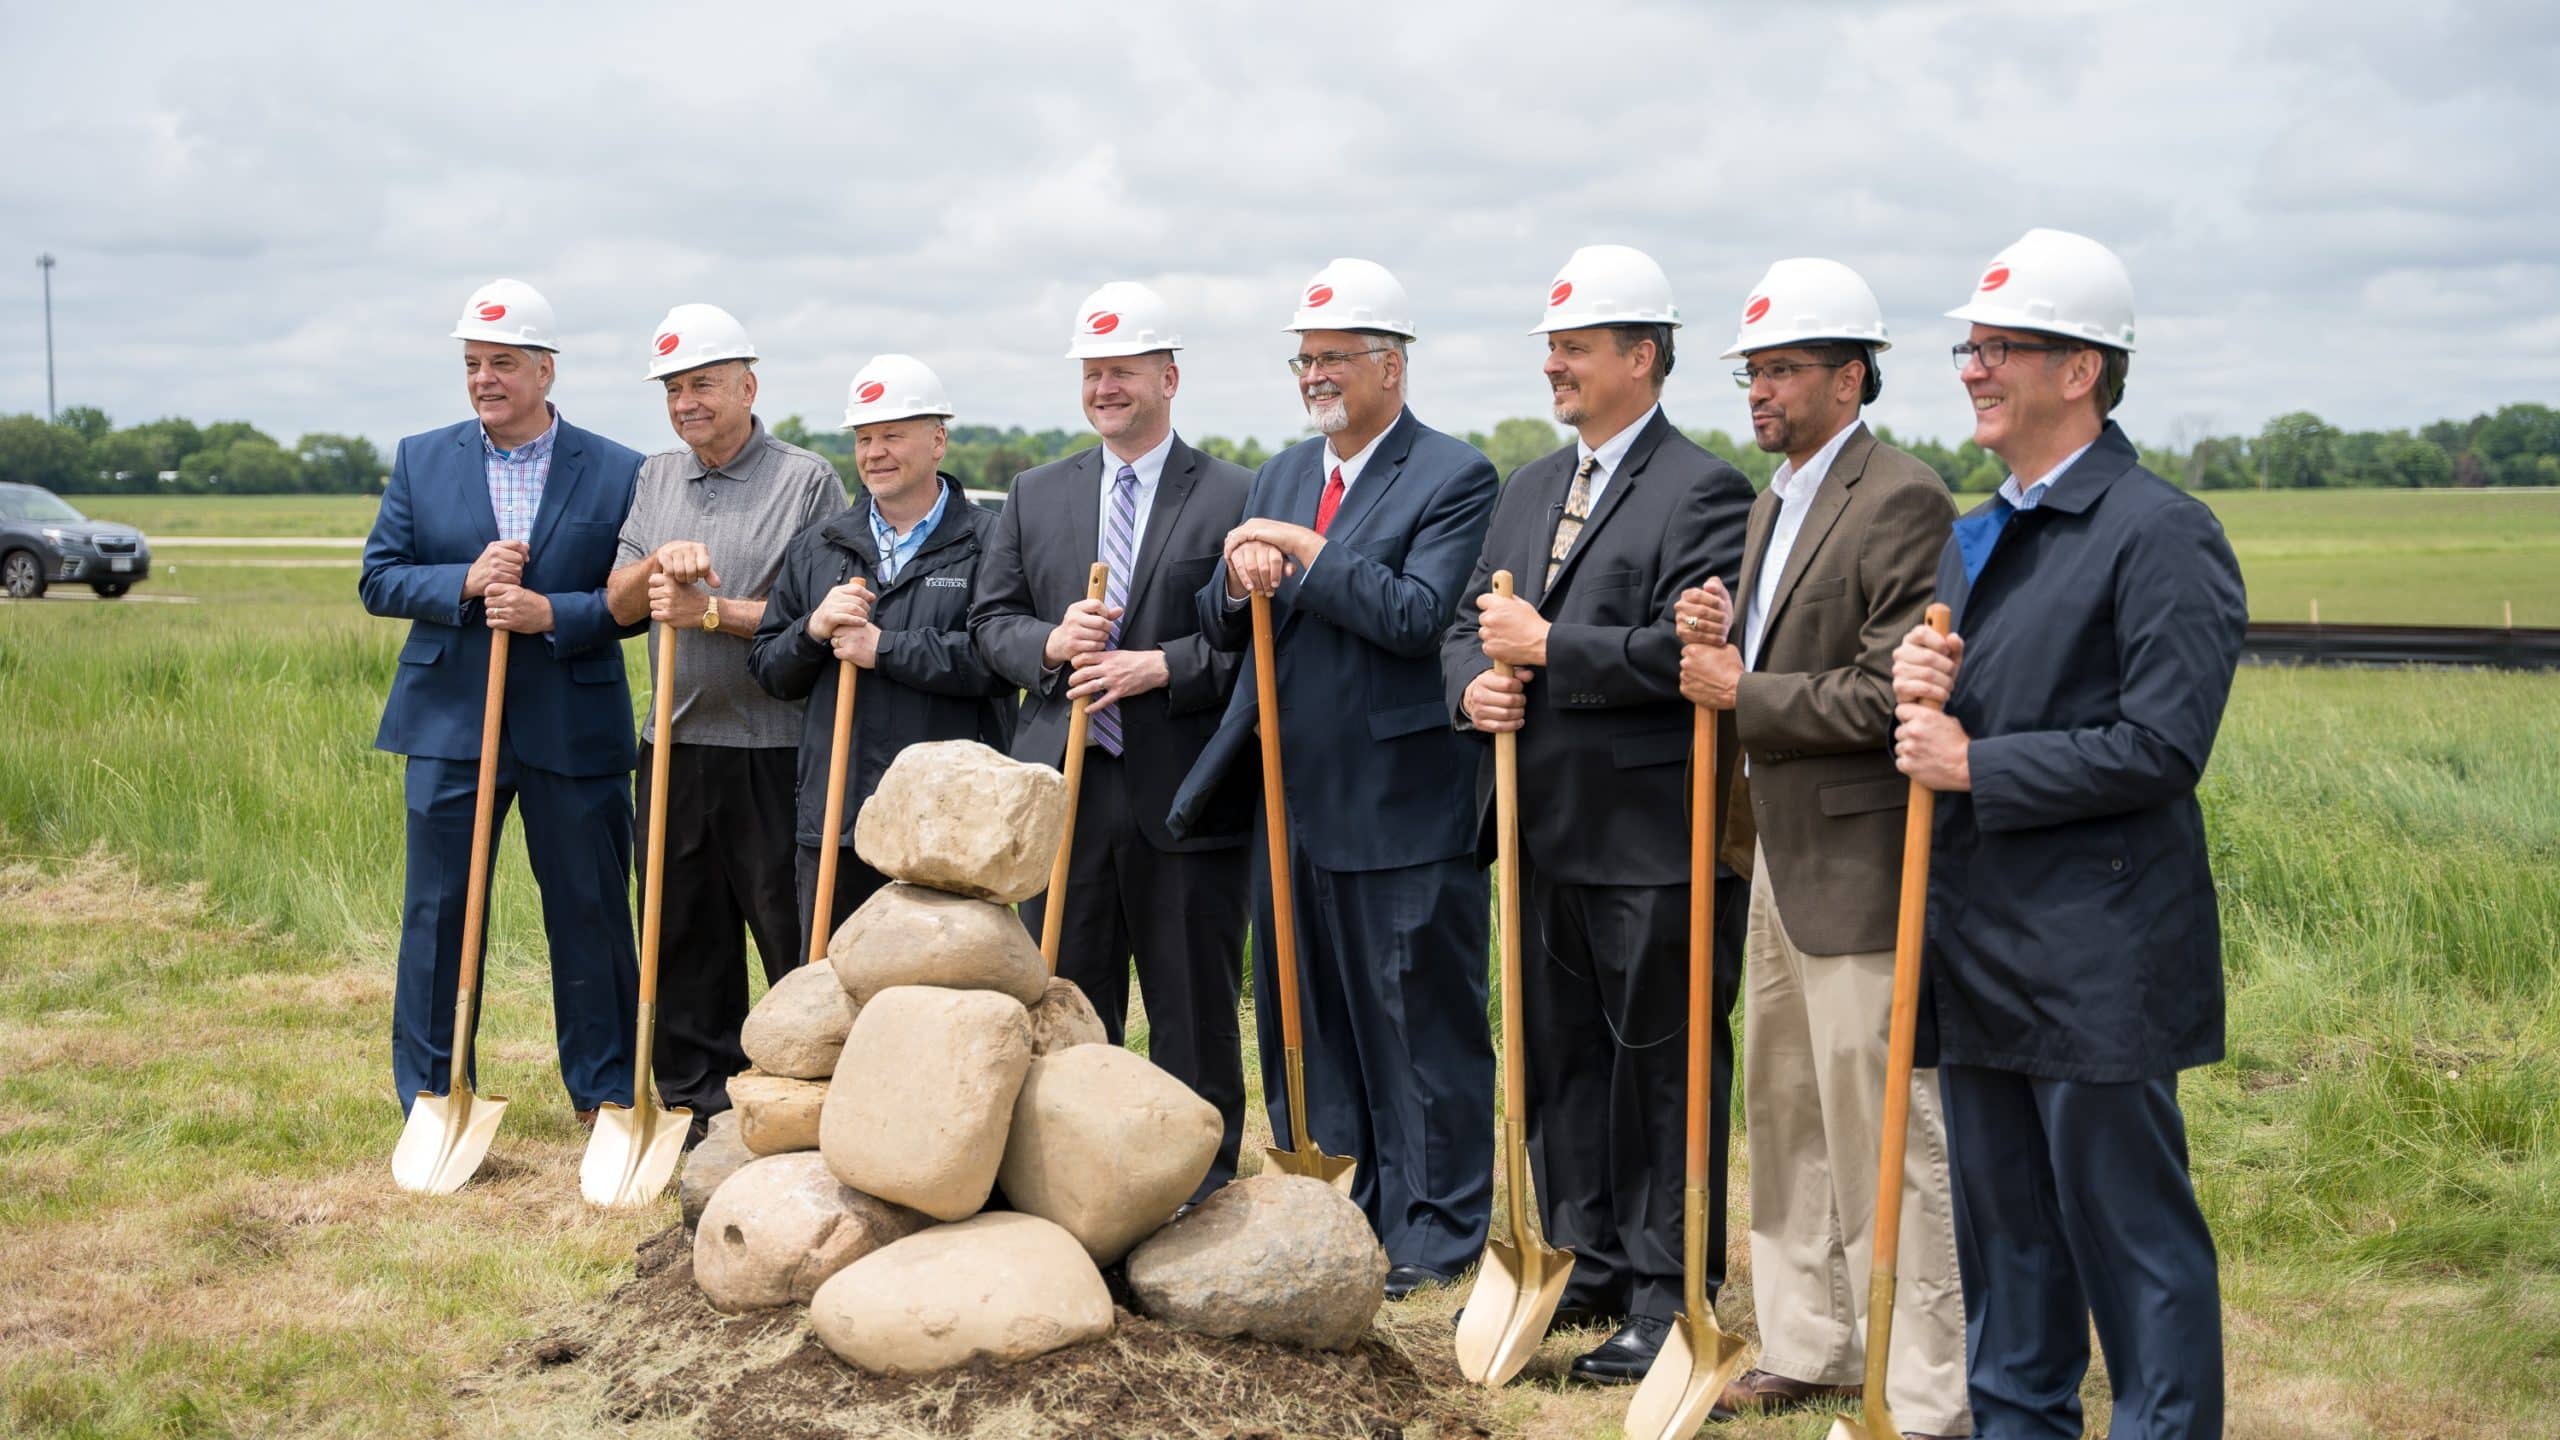 The Successful Groundbreaking Ceremony And How To Plan It Catalyst Construction 